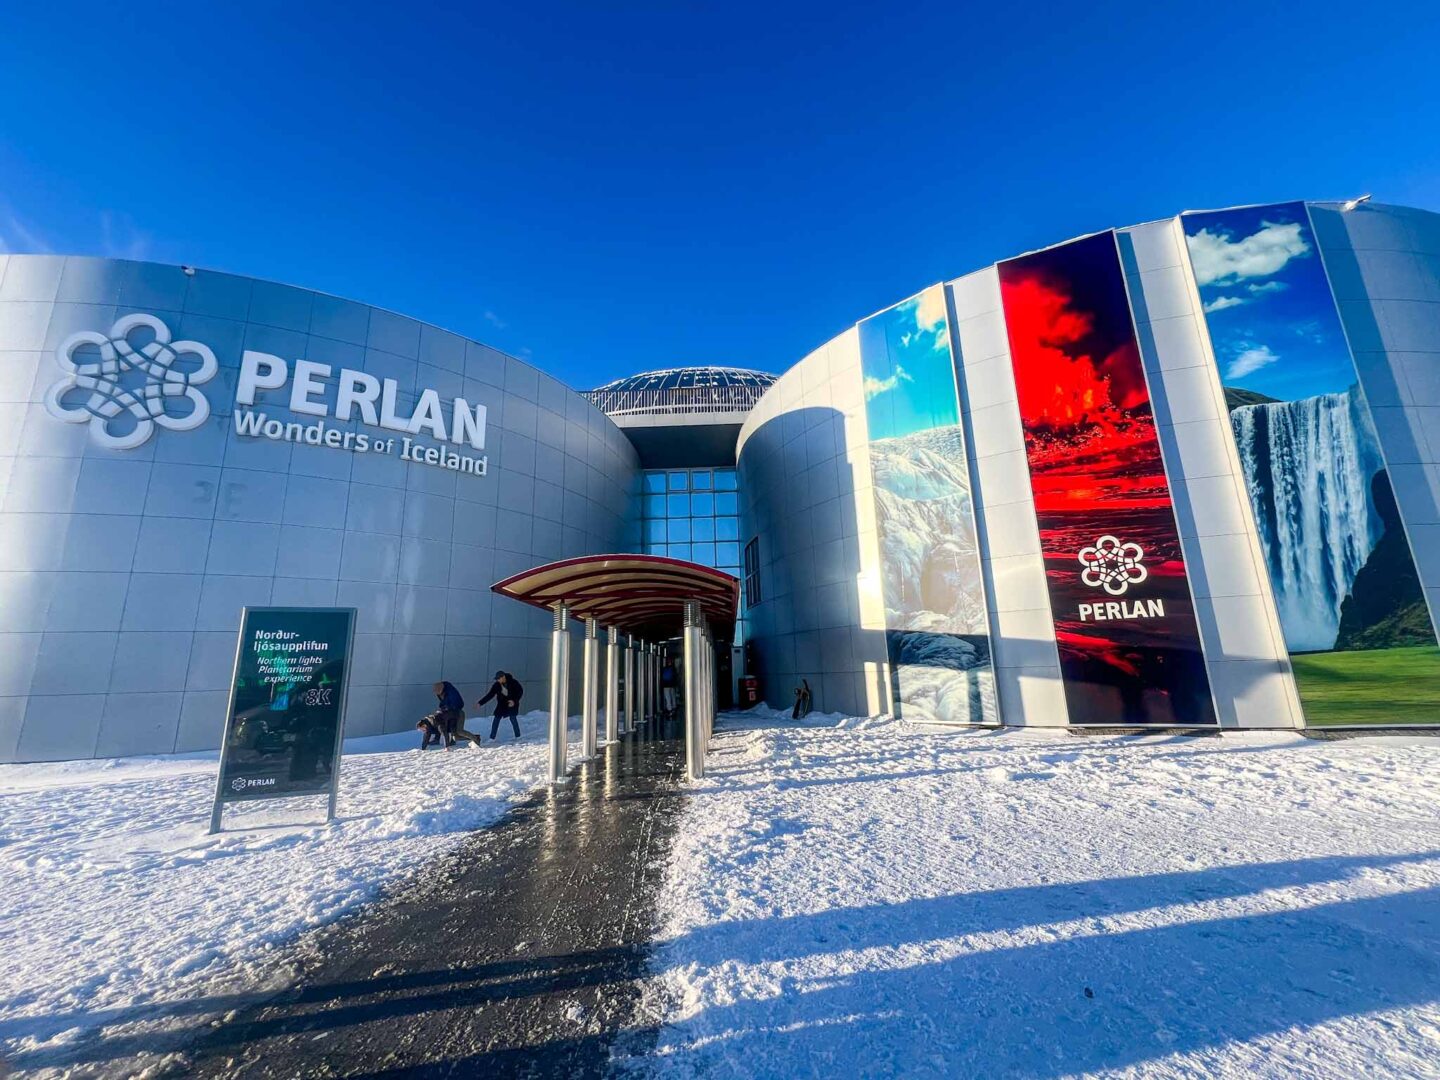 Iceland 4 days, Perlan Museum from the outside